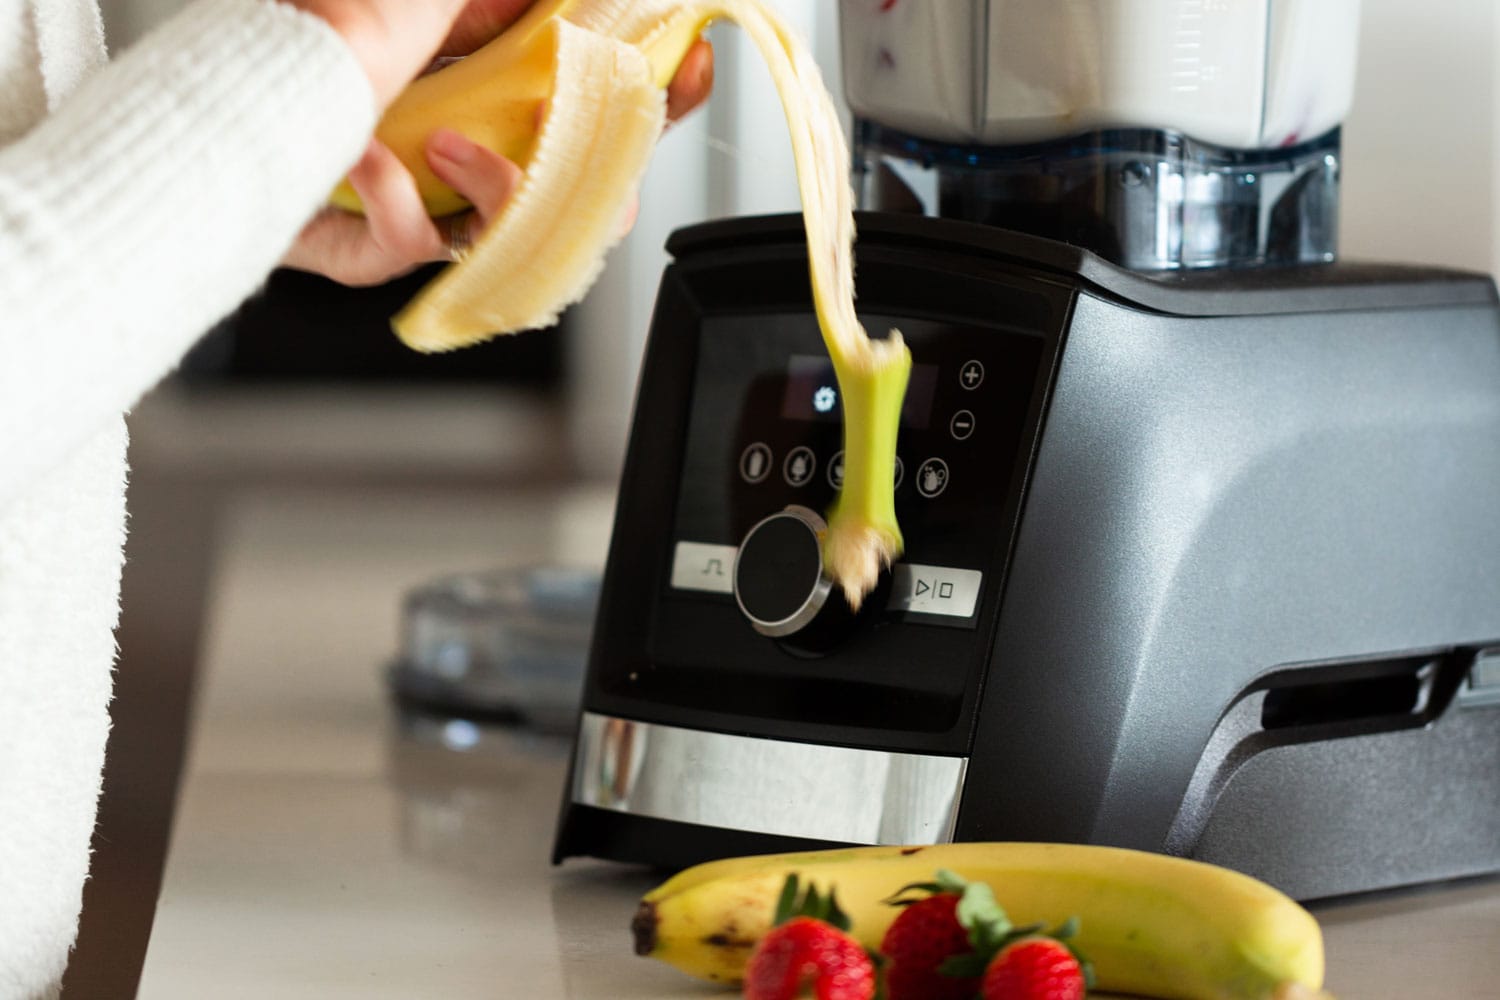 Making smoothie in the kitchen using a Vitamix blender